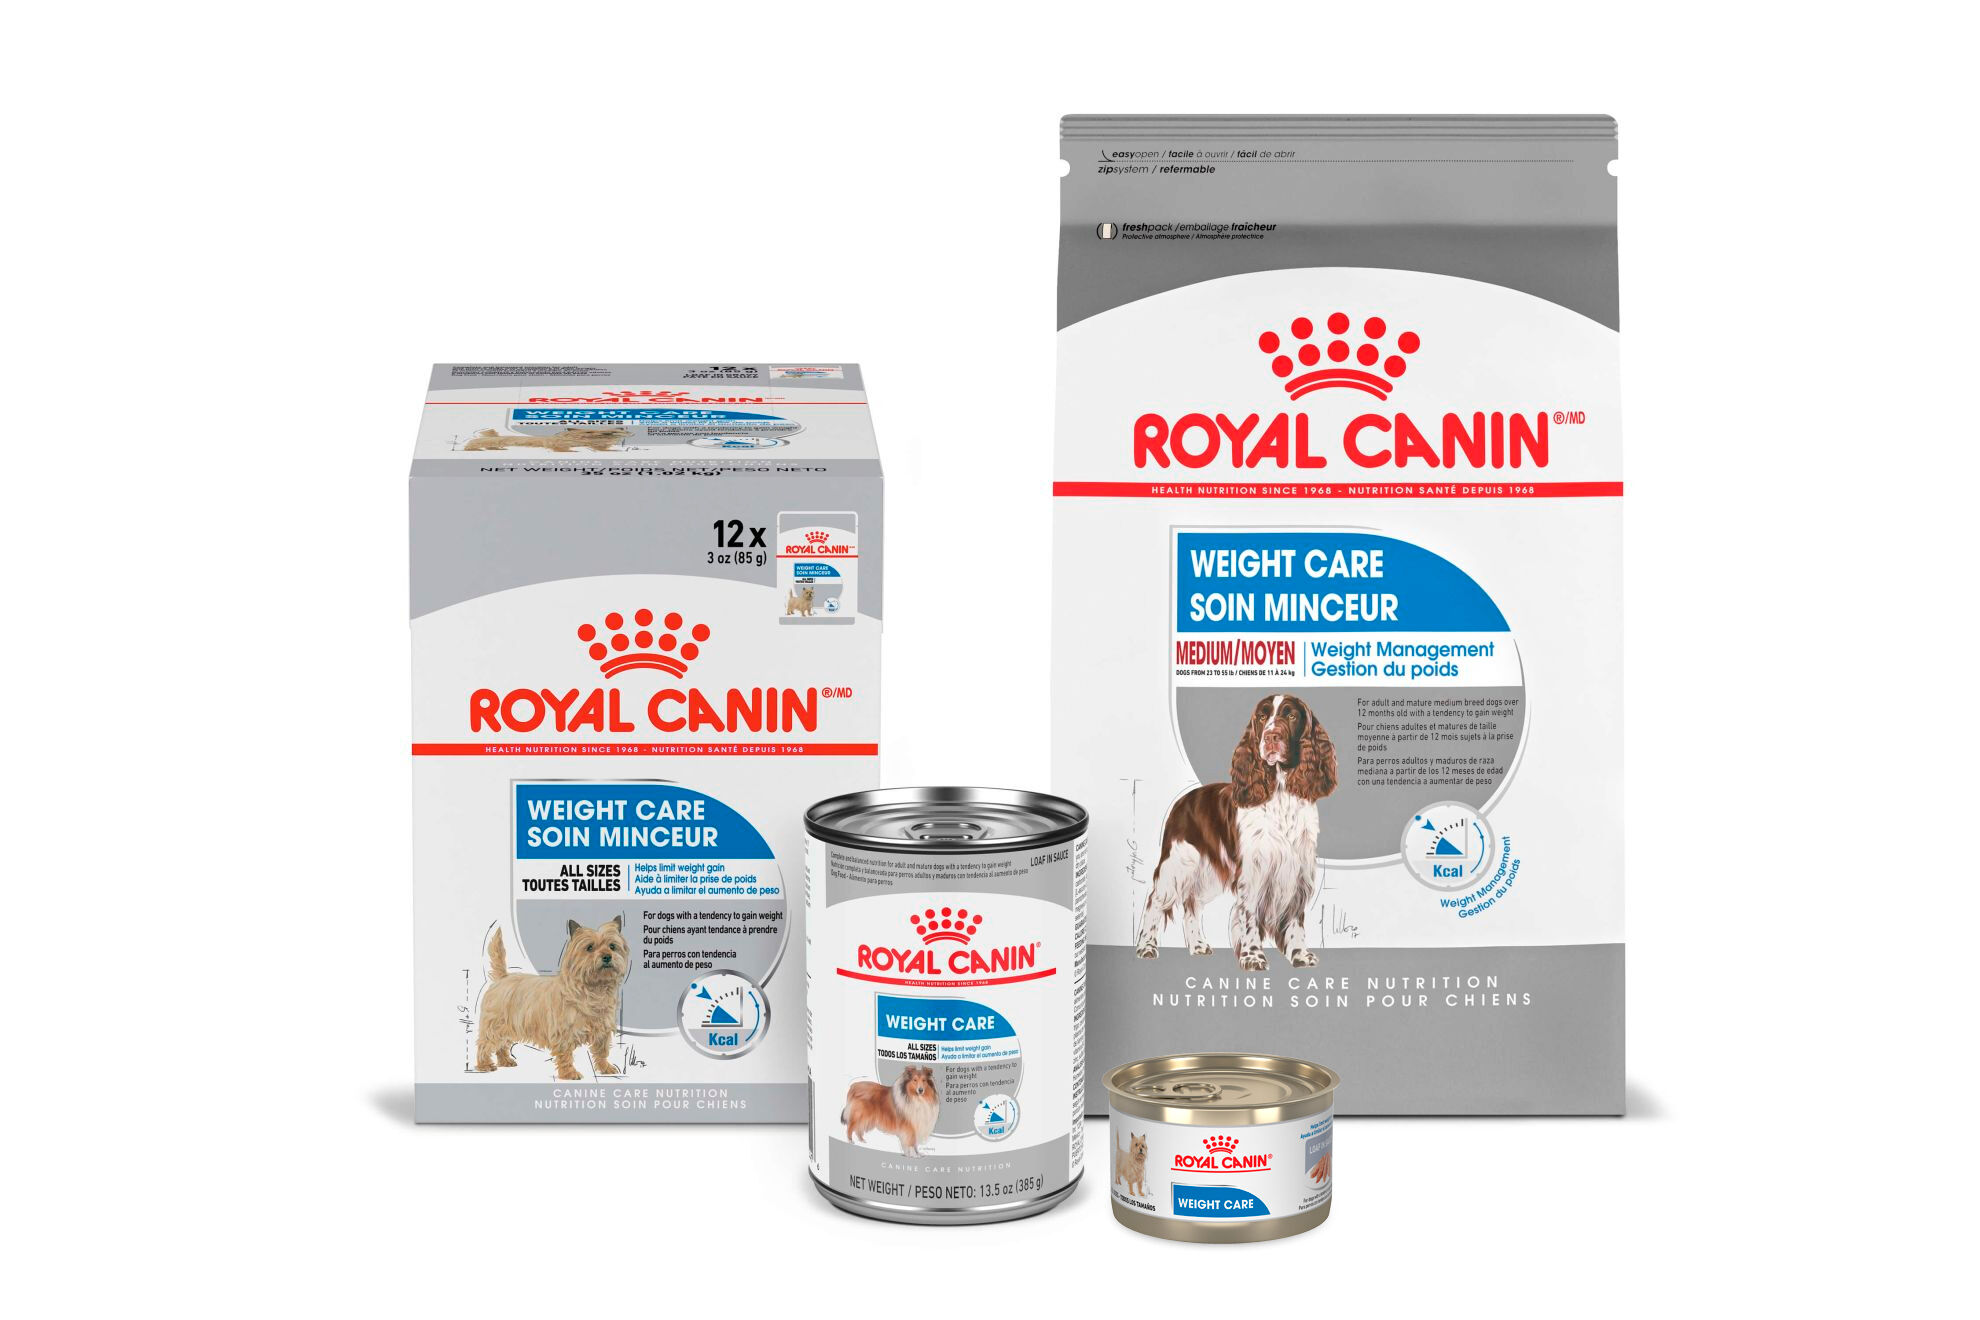 Royal Canin Weight Care Range of Products